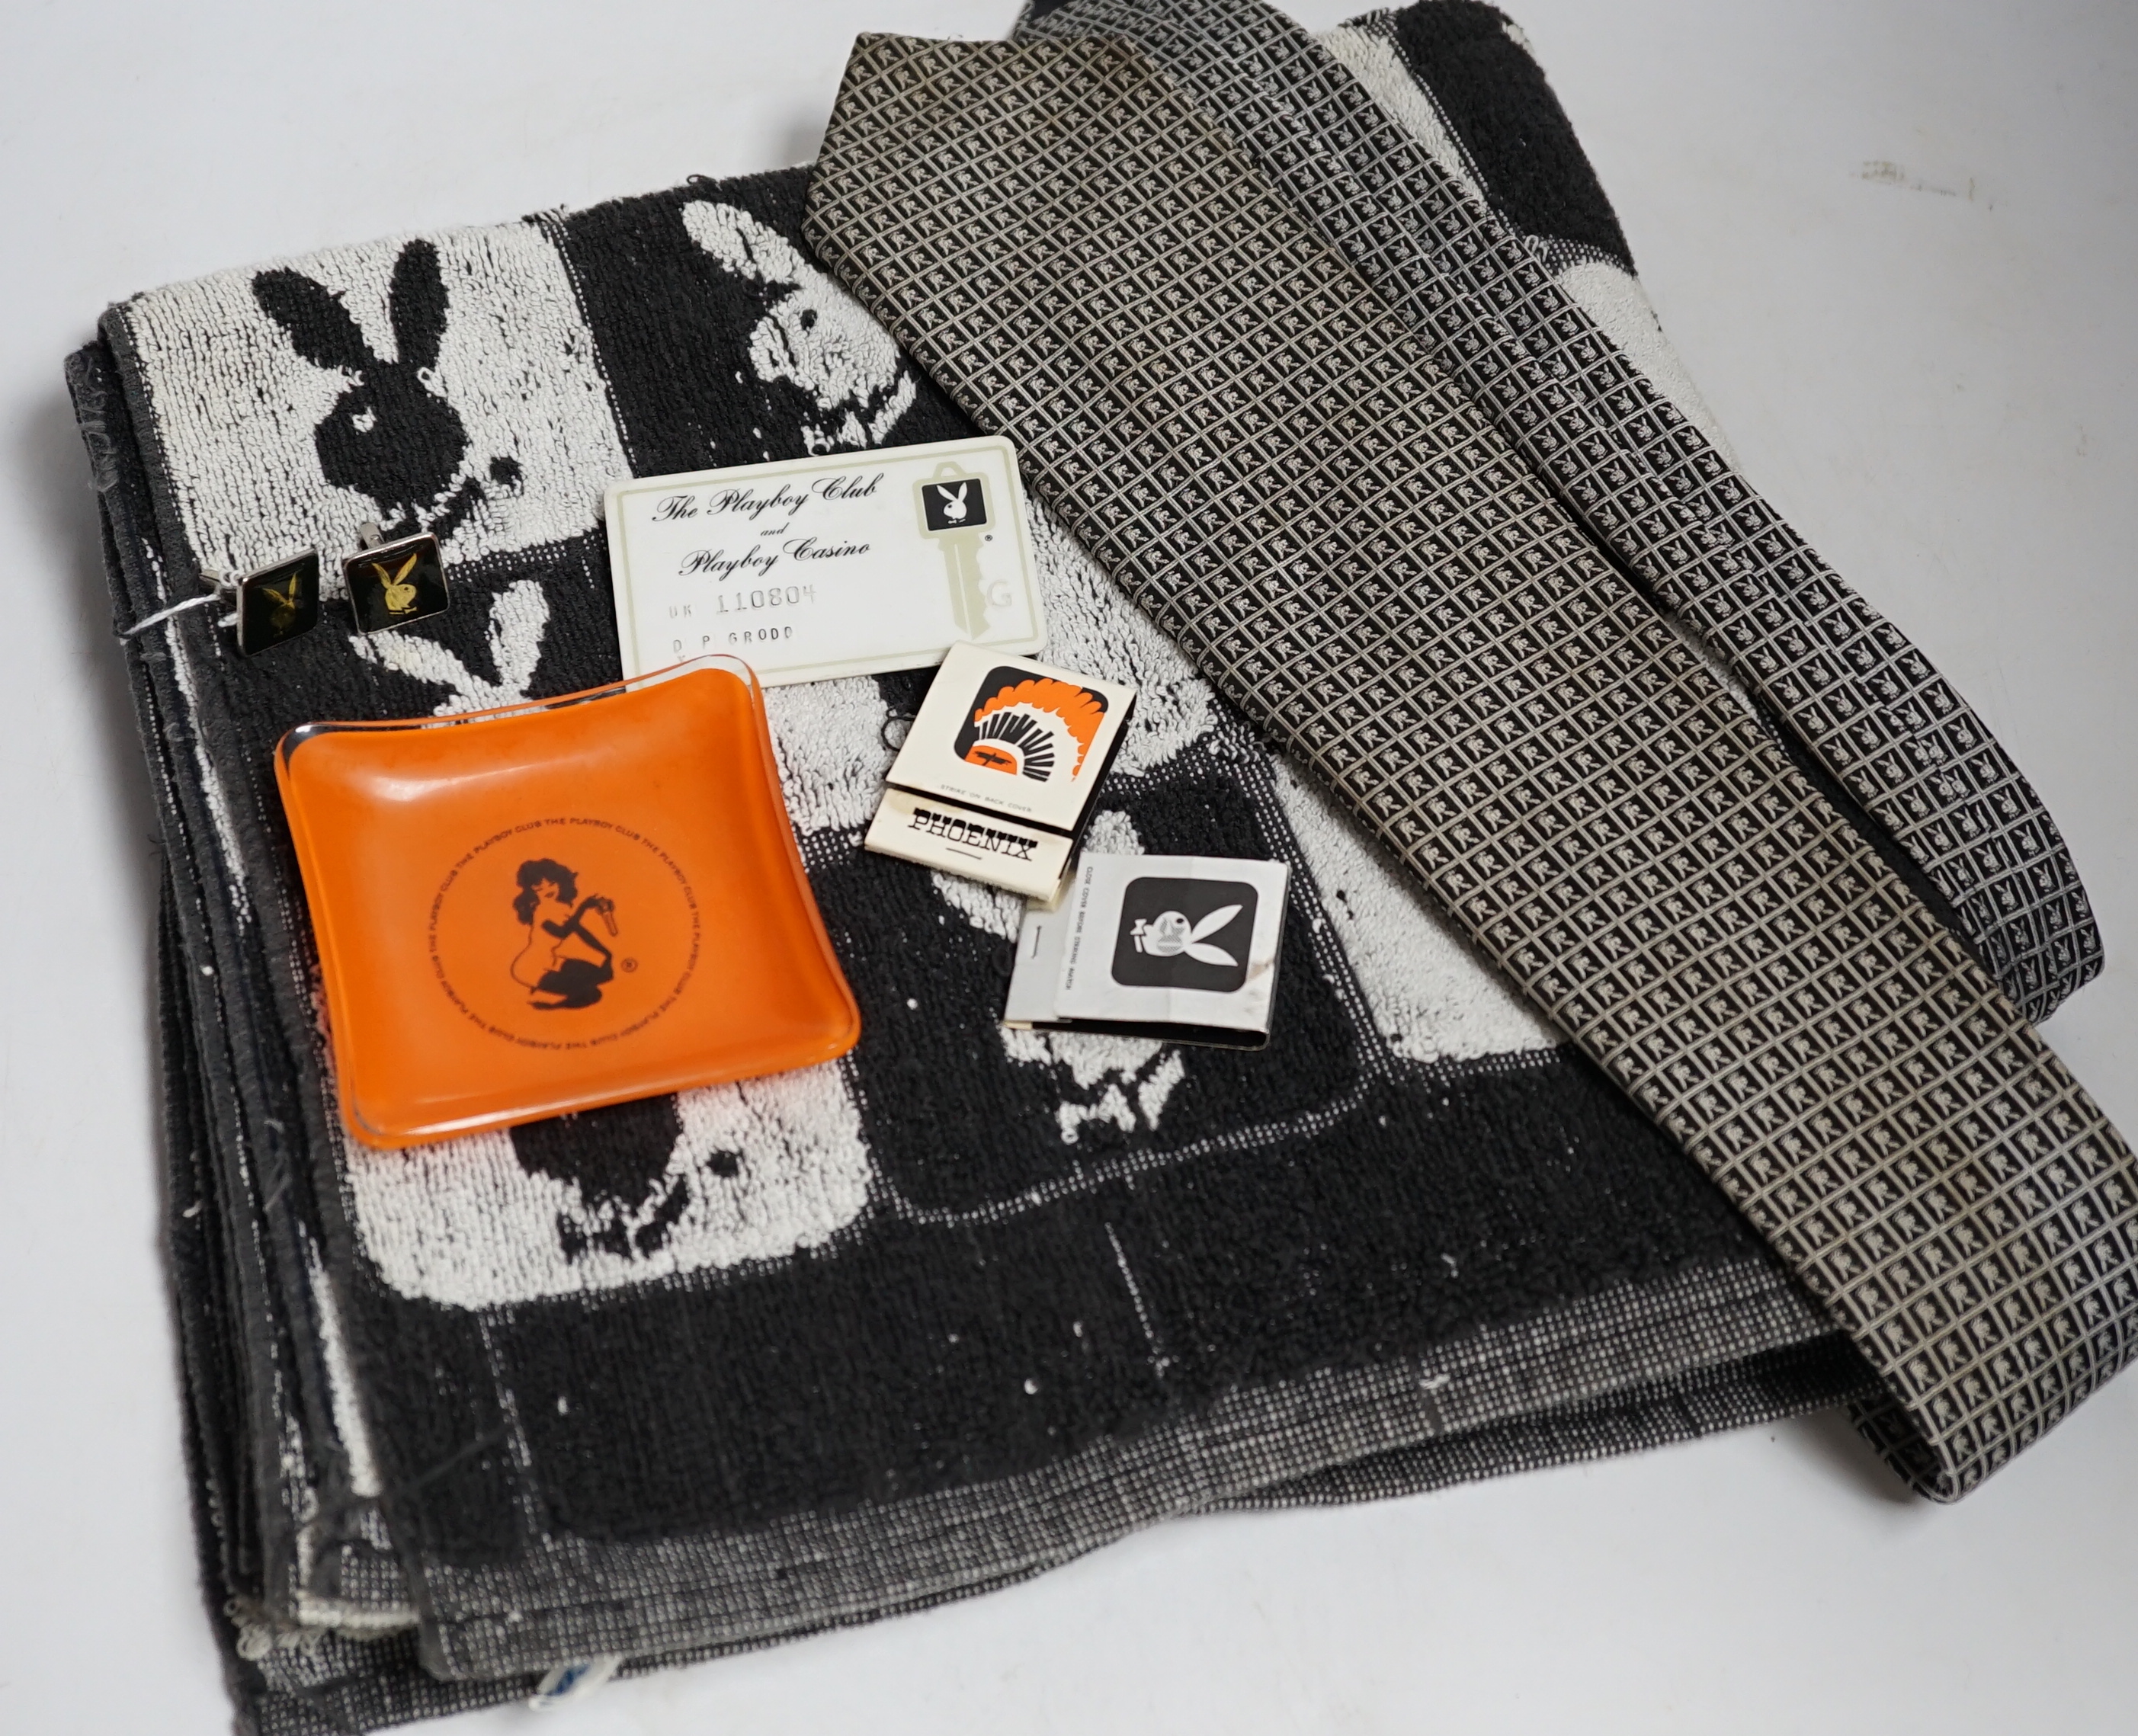 Playboy memorabilia: tie, an ashtray, two packs of matches, towel, a pair of cuff-links, membership card